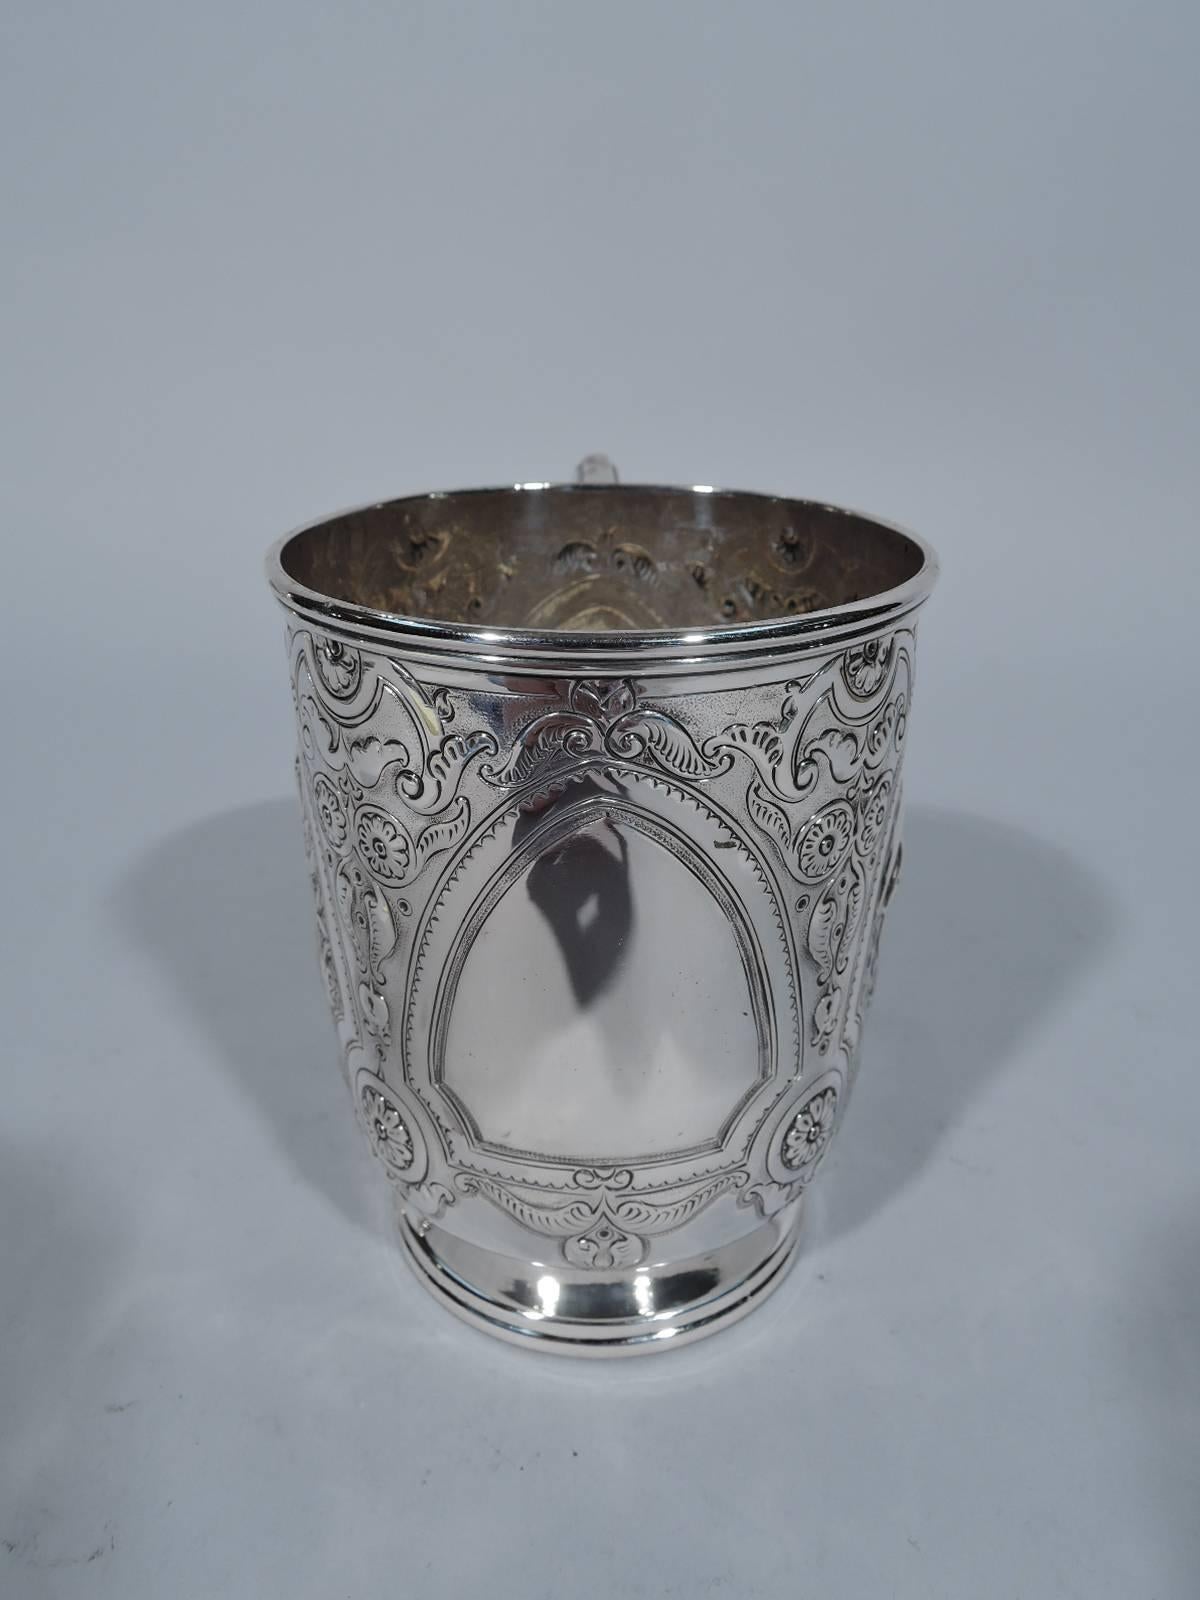 Victorian sterling silver christening mug. Made by Thomas Bradbury & J. Henderson in London in 1880. Stepped foot, scrolled bracket handle, and molded rim. Flowers, foliage, and scrolls surrounding curved and scalloped triangular frames inset with